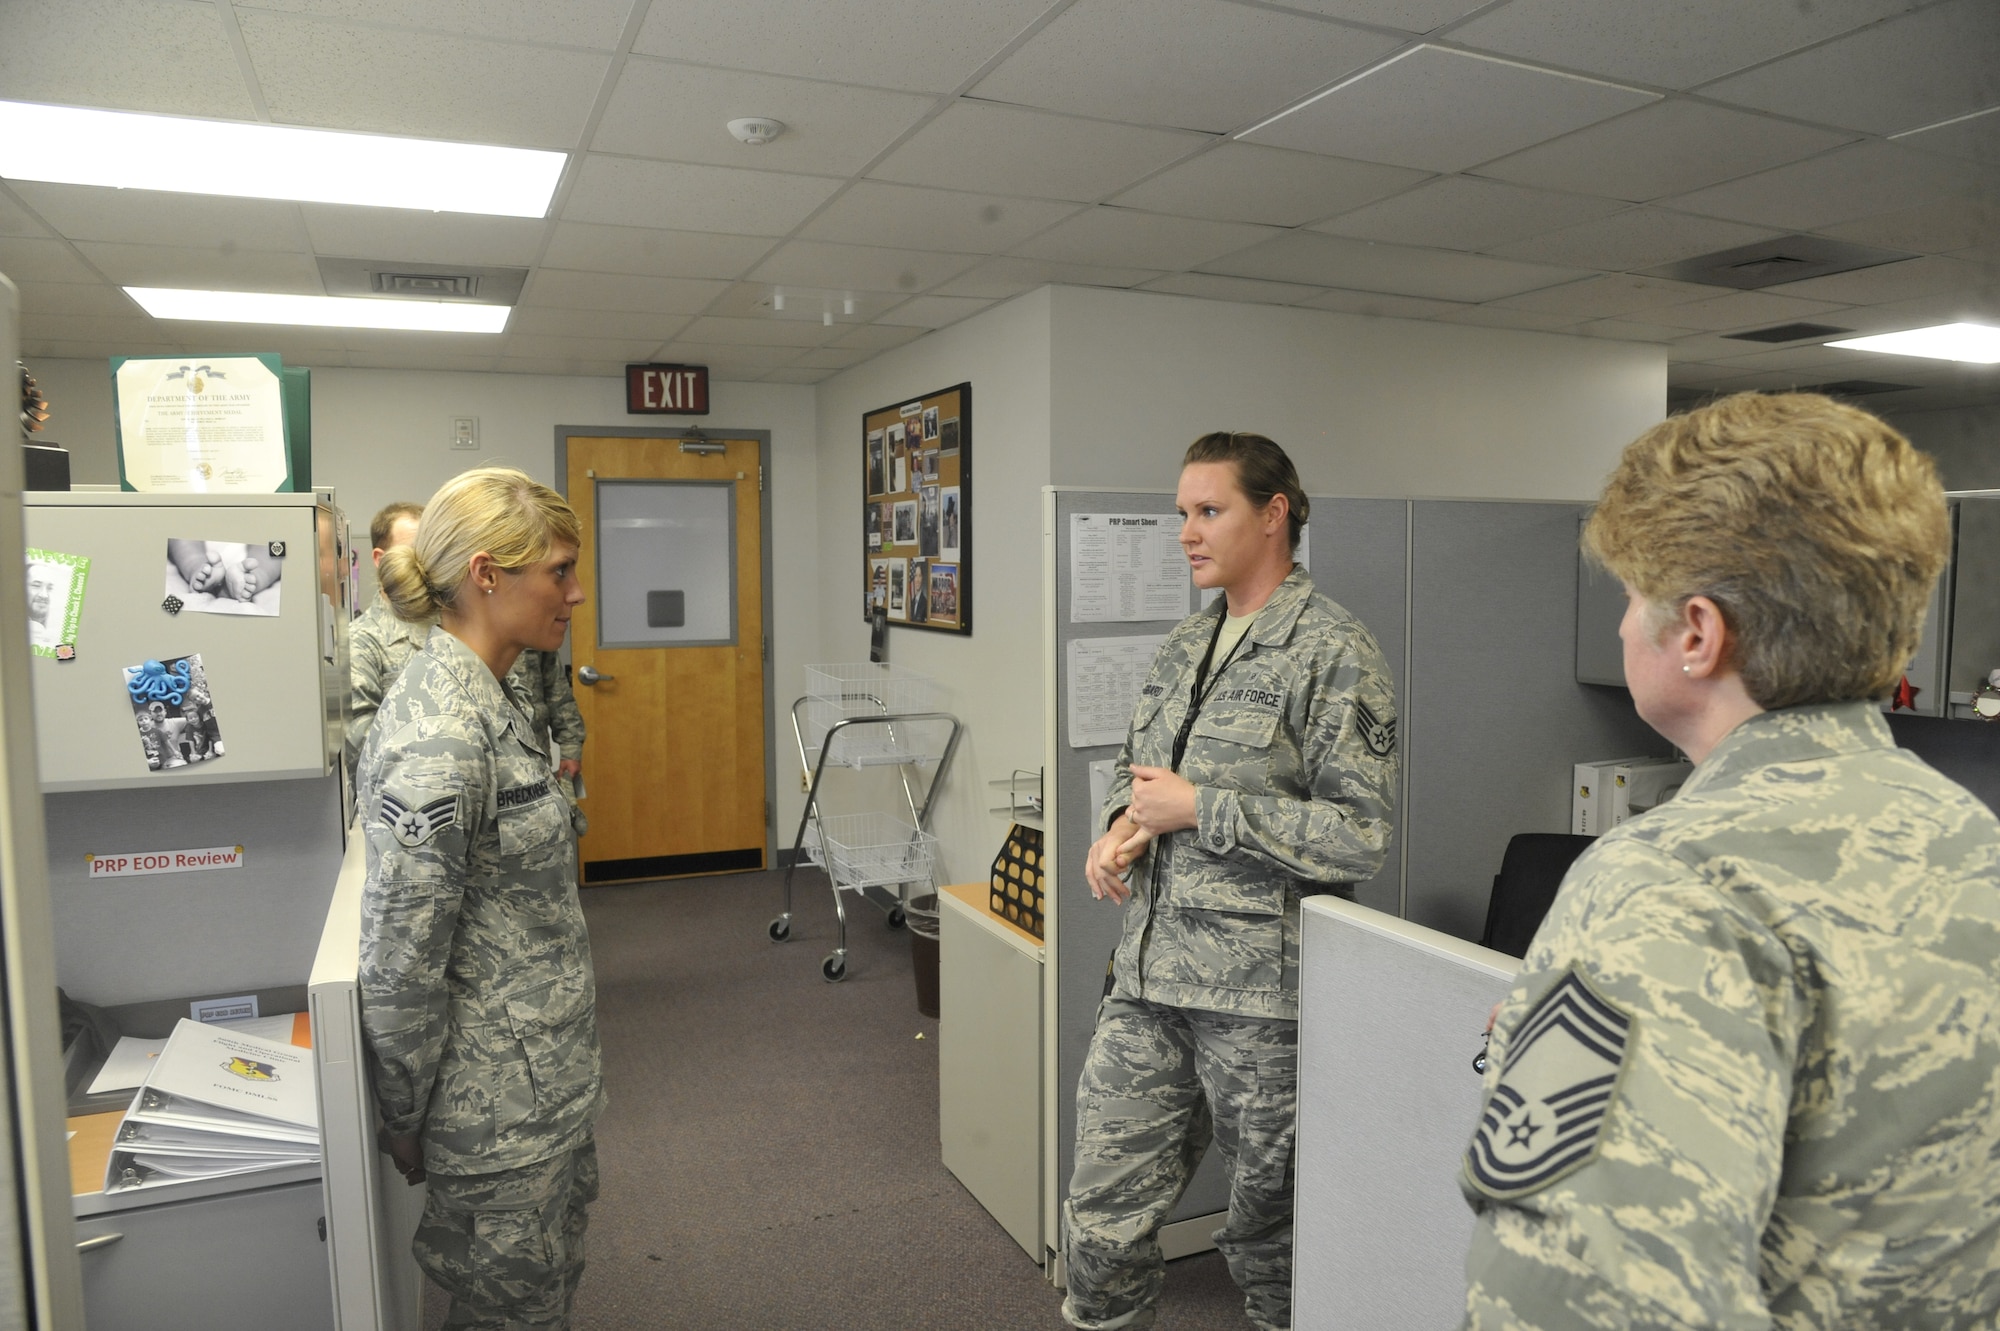 Senior Airman Bryenna Breckheimer, 2012 Air Force Global Strike Command Outstanding Airman of the Year, speaks with Airmen from the 509th Medical Group at Whiteman Air Force Base, Mo., Sept. 25, 2013. As a medical professional herself, Breckheimer dedicated more than 80 hours toward Troop Medical Clinic expansion, educated more than 250 Afghans on sanitation and hygiene efforts, and tested 200 blood units for the critical blood bank at the Afghan National Army Hospital while deployed to Afghanistan in 2011. (U.S. Air Force photo by Airman 1st Class Keenan Berry/Released)

